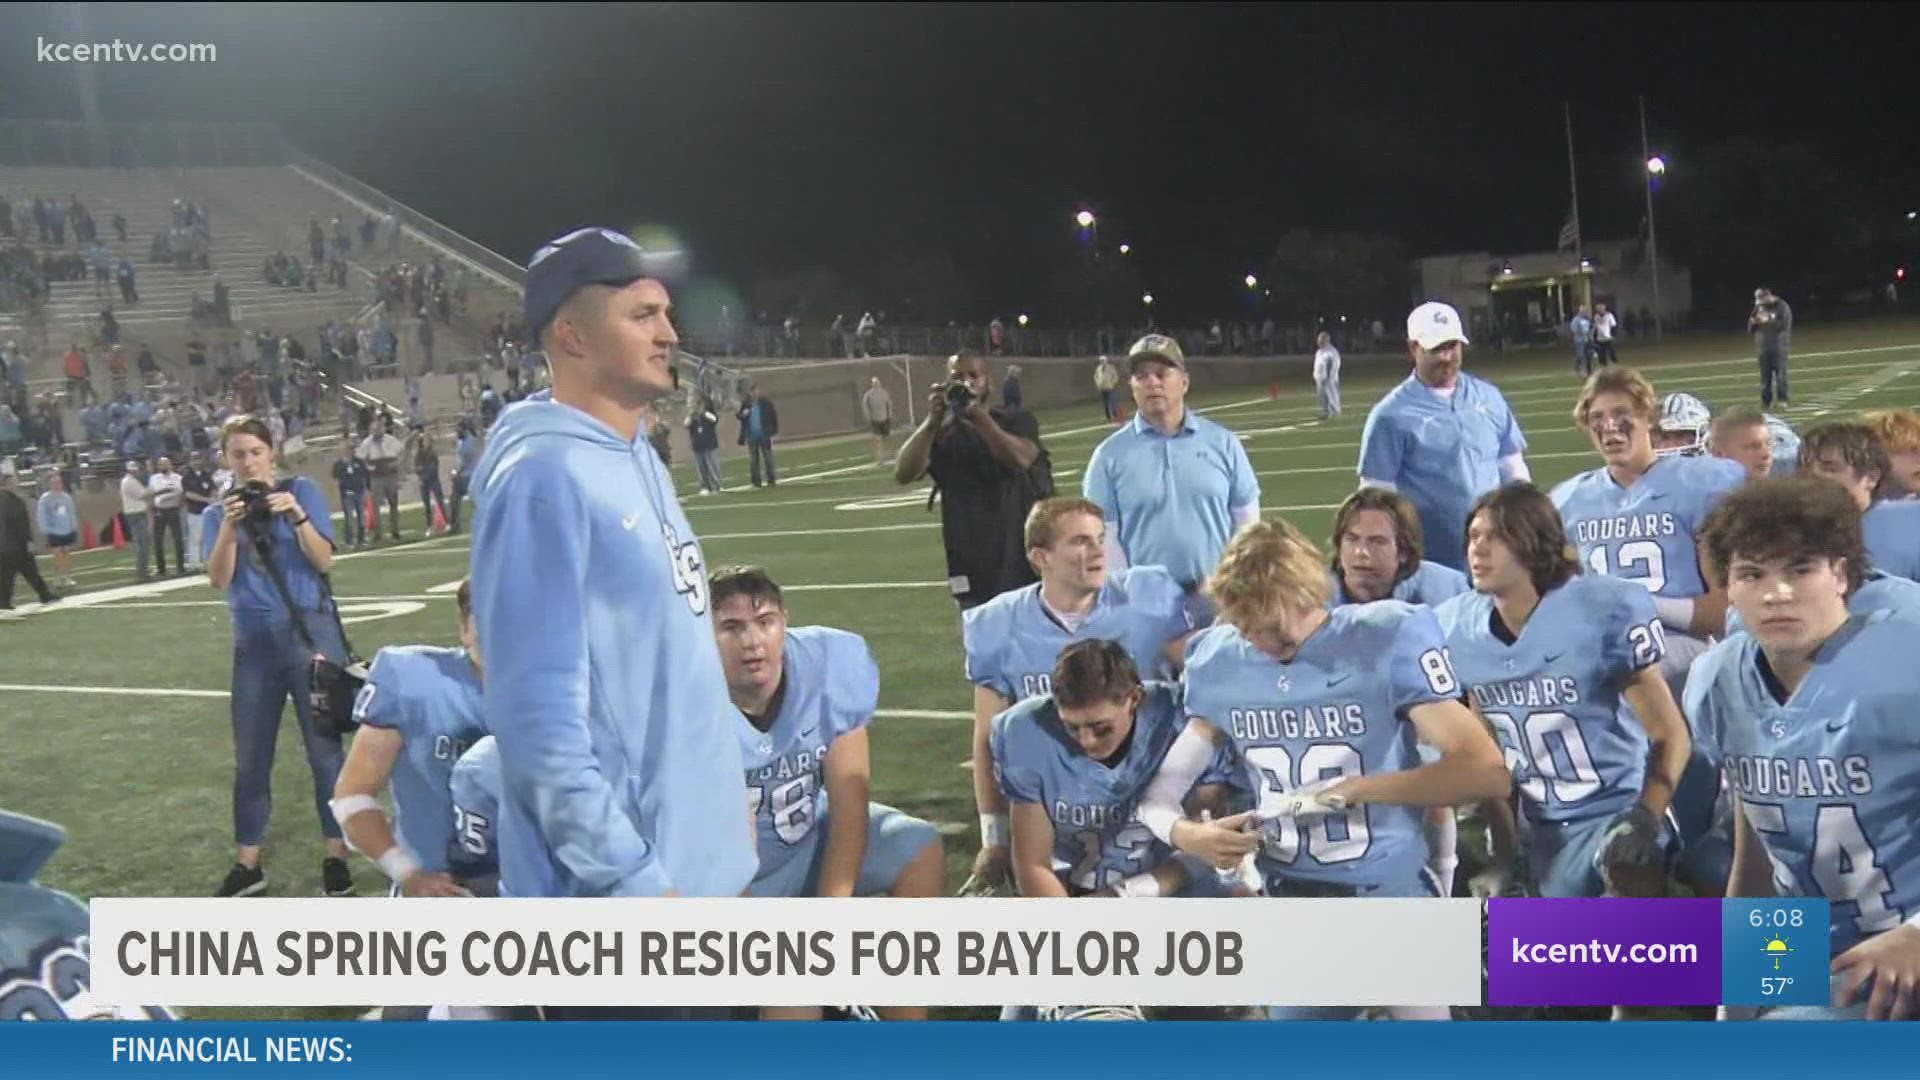 China Spring head football coach, Brian Bell, has resigned to join the Baylor Bears, according to China Spring Athletic Director Josh Gregory.